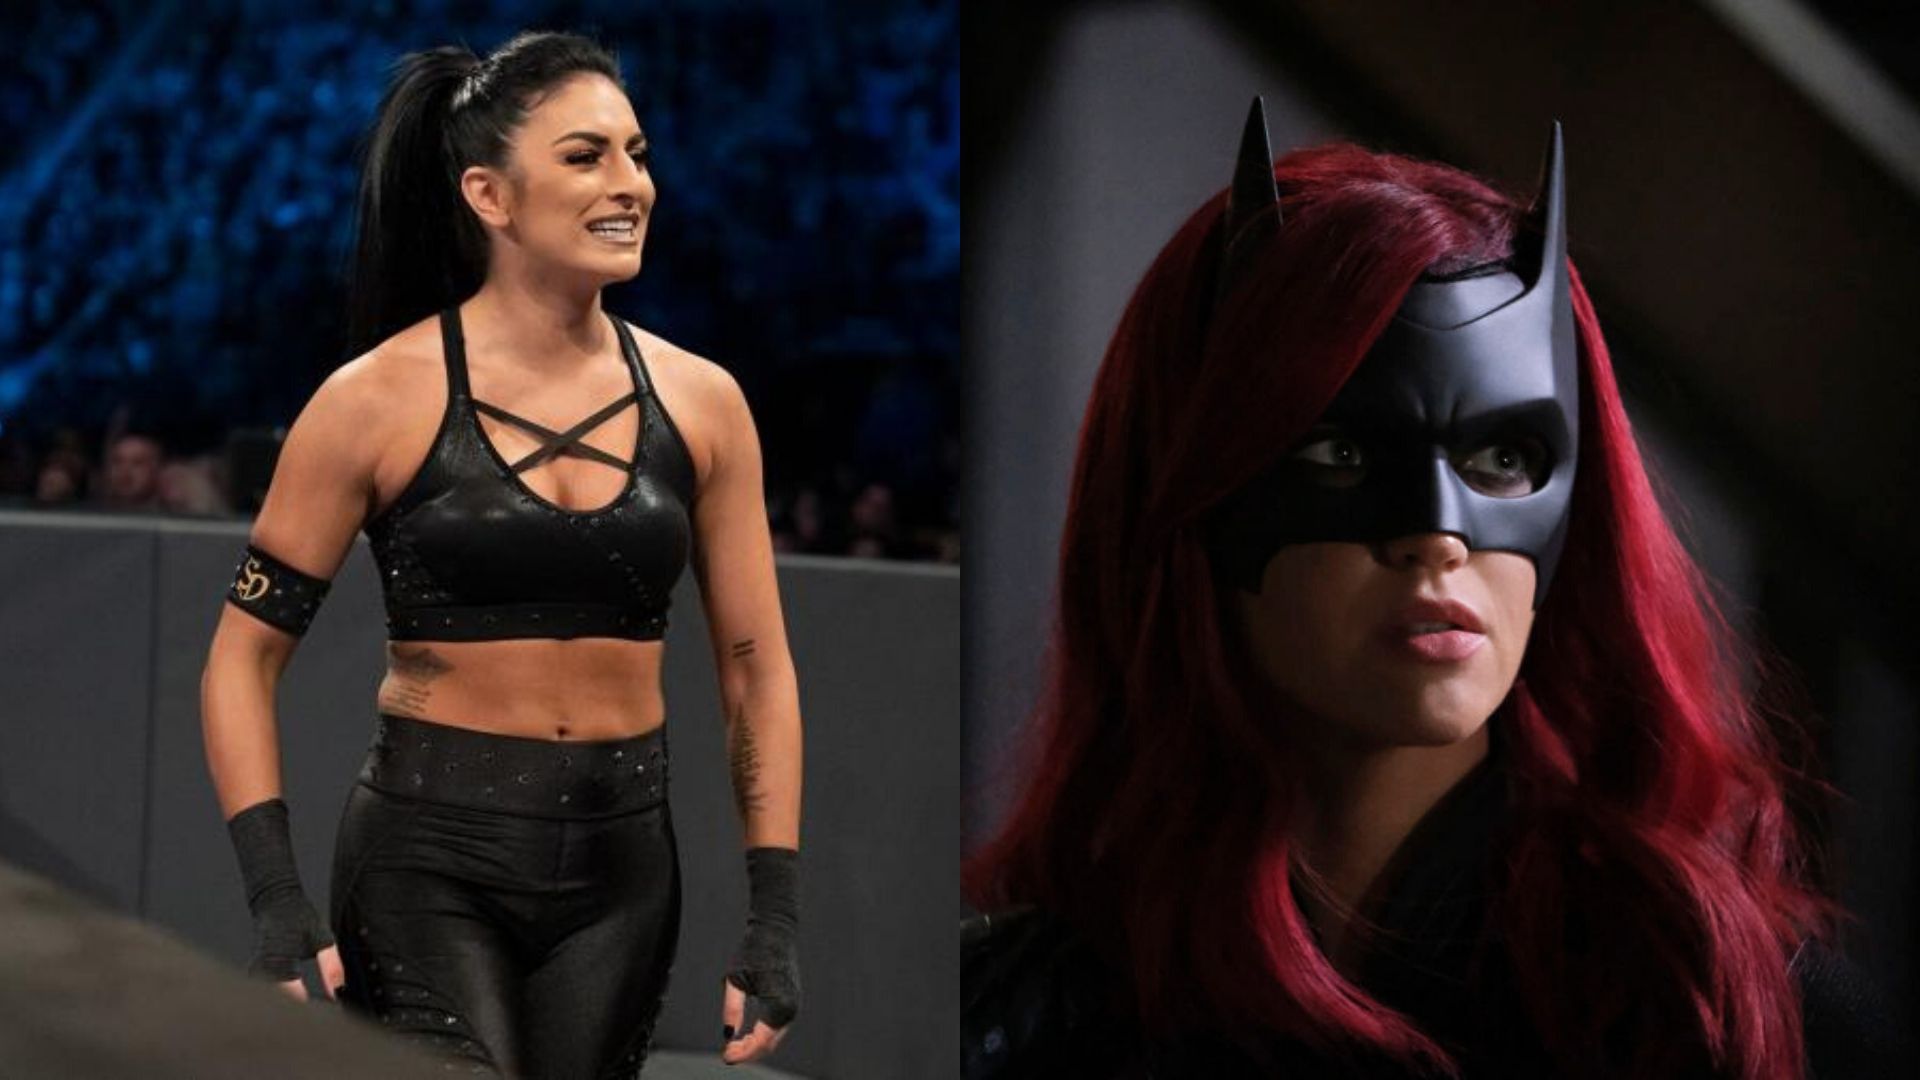 Sonya Deville wants to be the next Batwoman